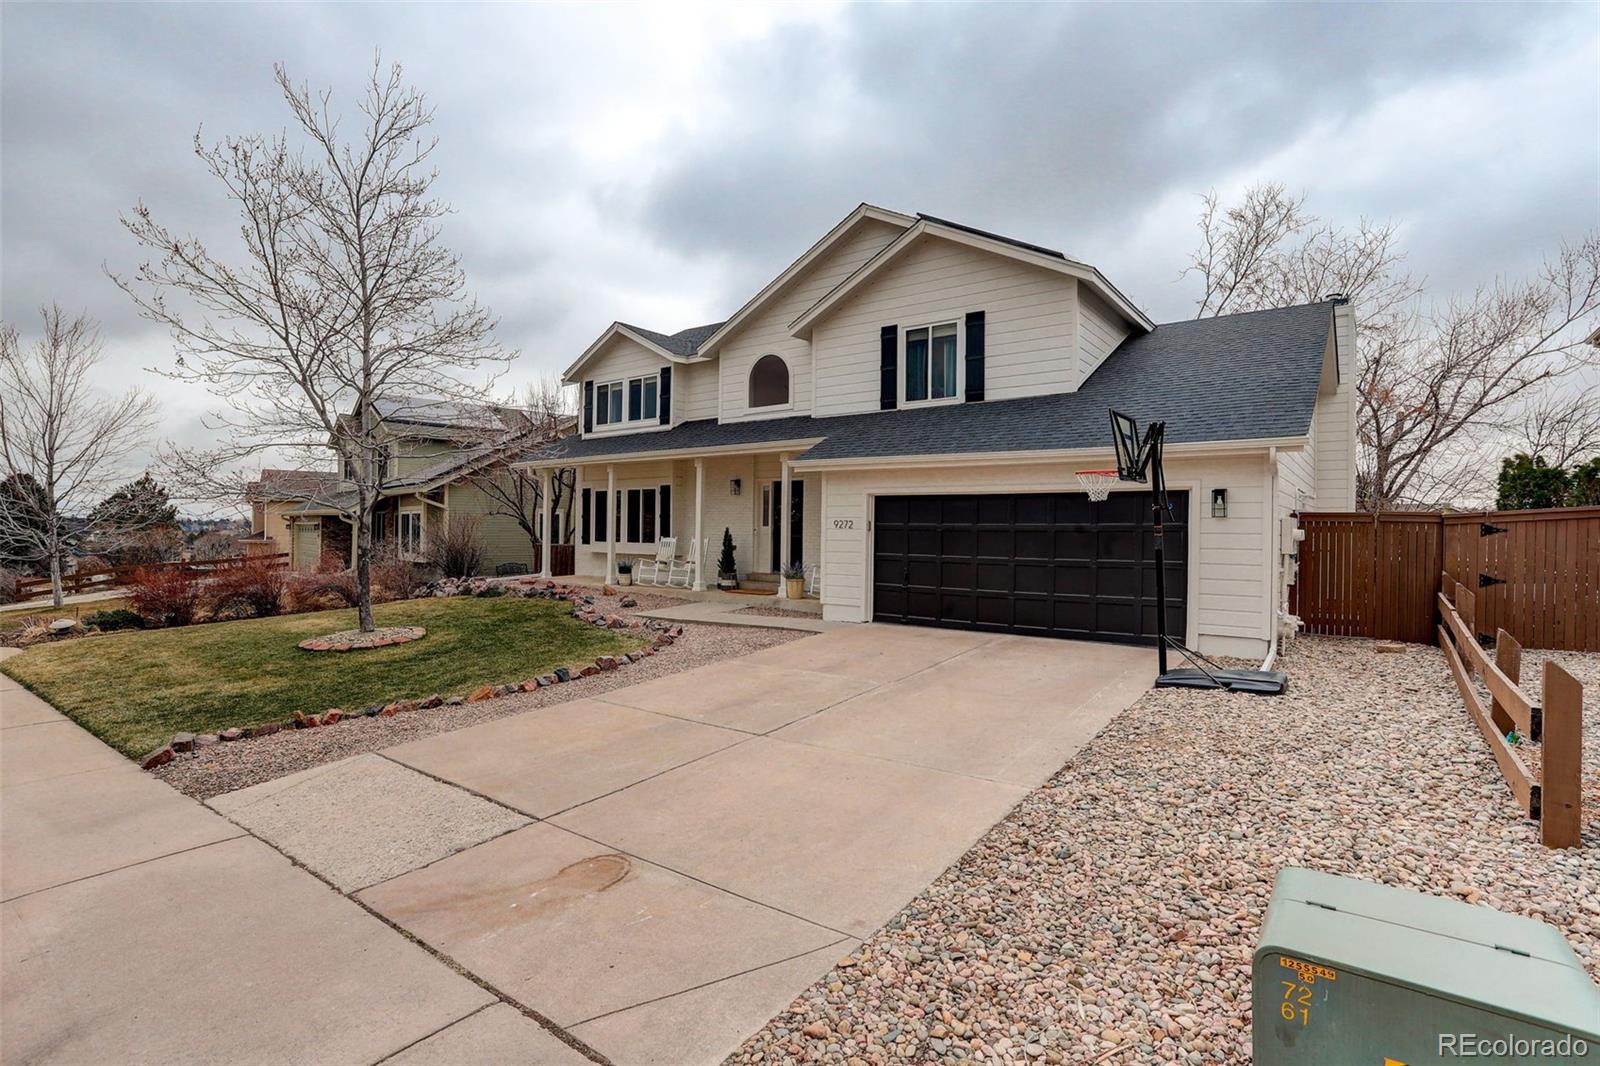 9272  crestmore way, Highlands Ranch sold home. Closed on 2024-04-24 for $926,500.